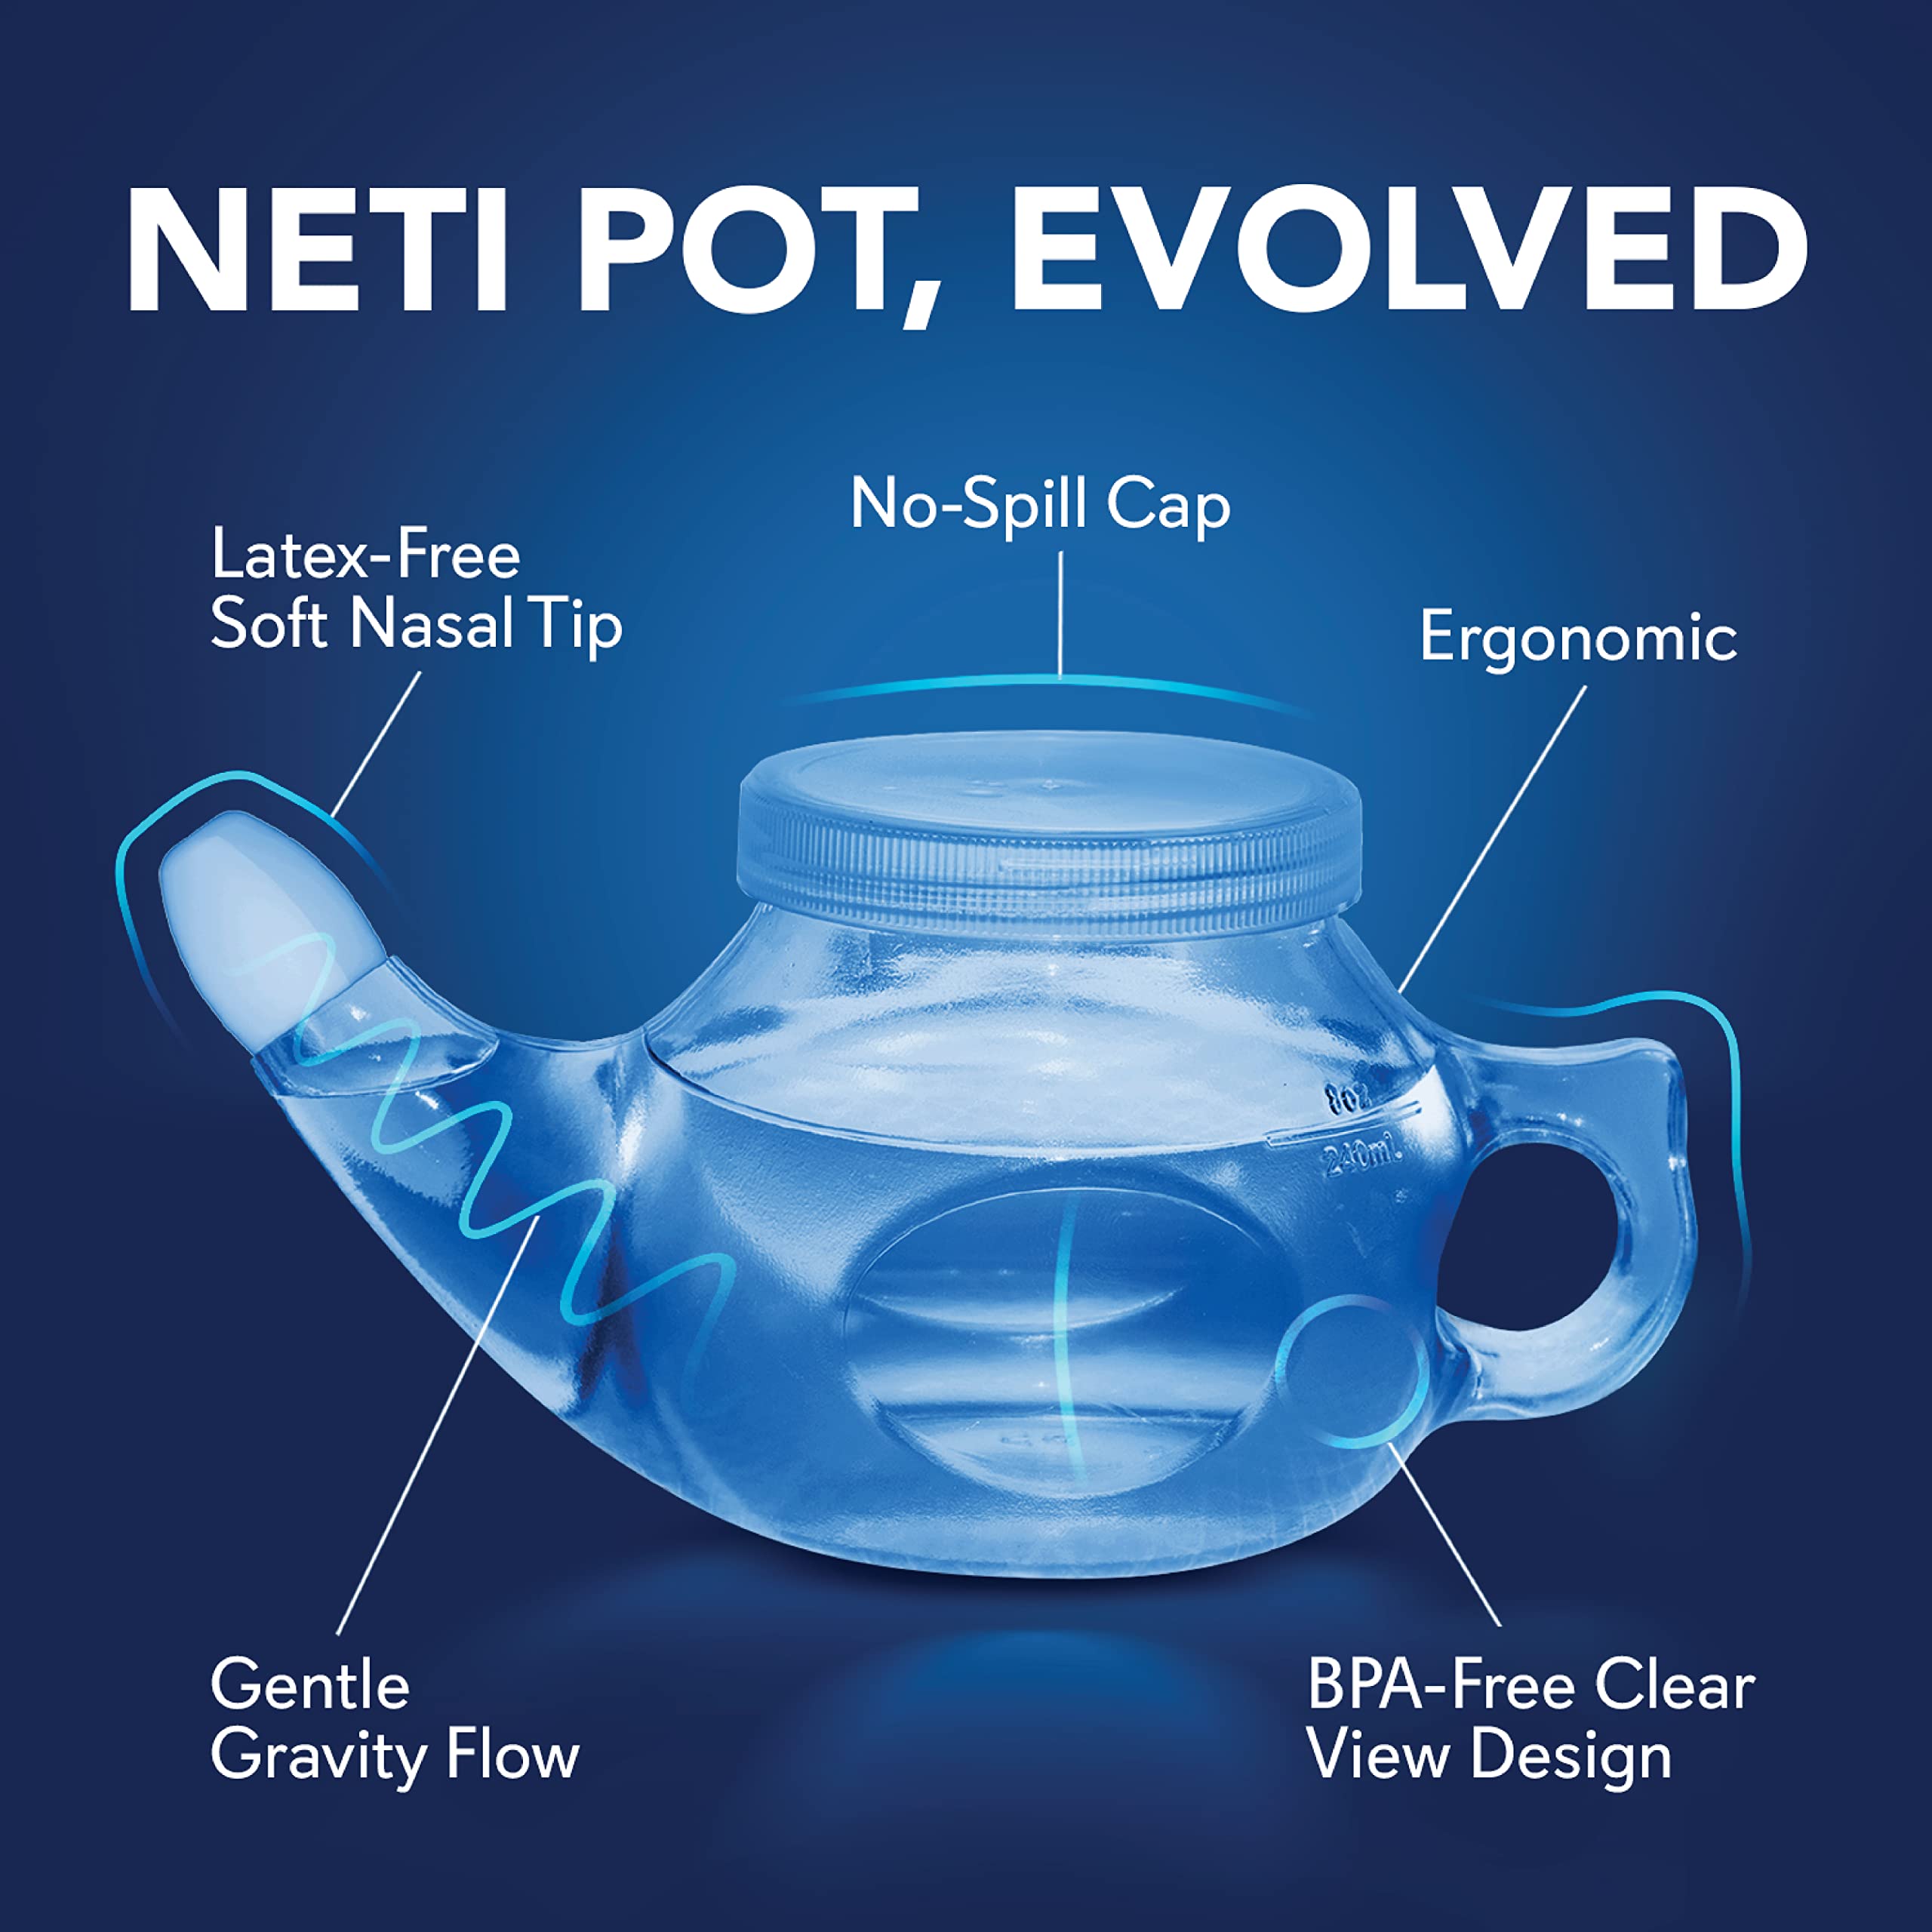 SinuCleanse Soft Tip Neti-Pot Nasal Wash Irrigation System Relieves Nasal Congestion & Irritation due to Cold & Flu, Dry Air, Allergies, Includes 30 All-Natural, Pre-Mixed Buffered Saline Packets